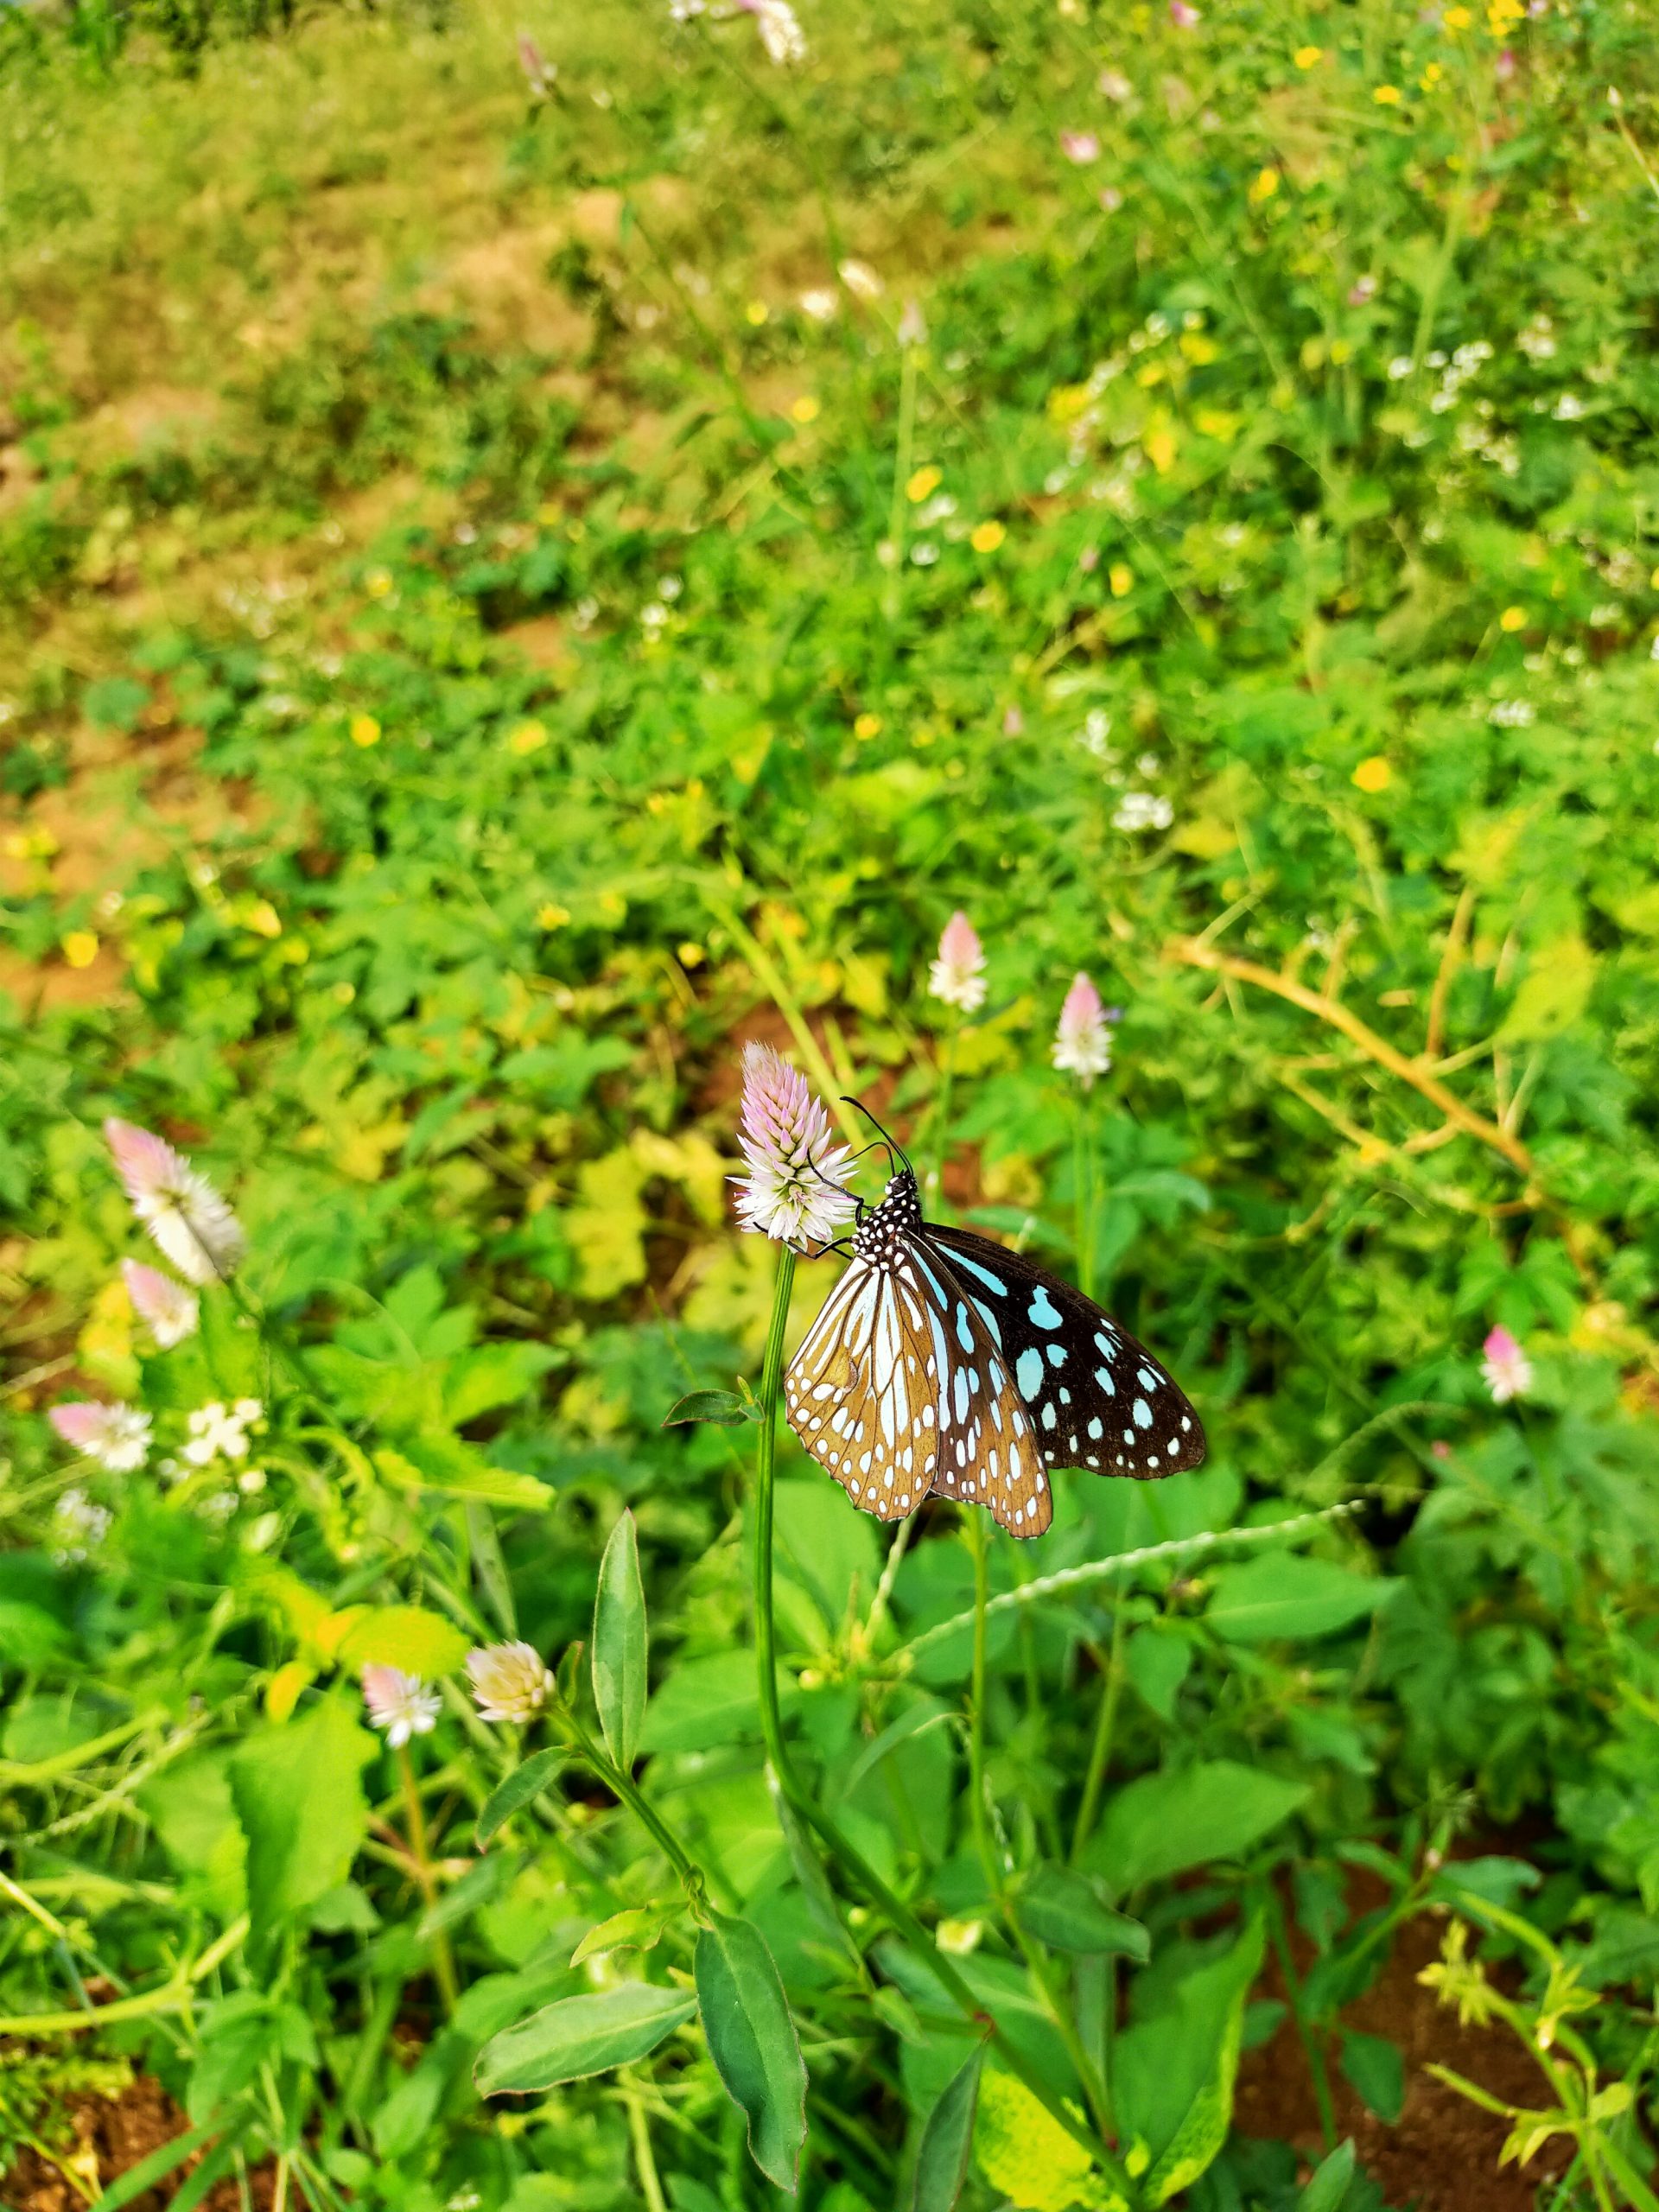 A butterfly on a plant